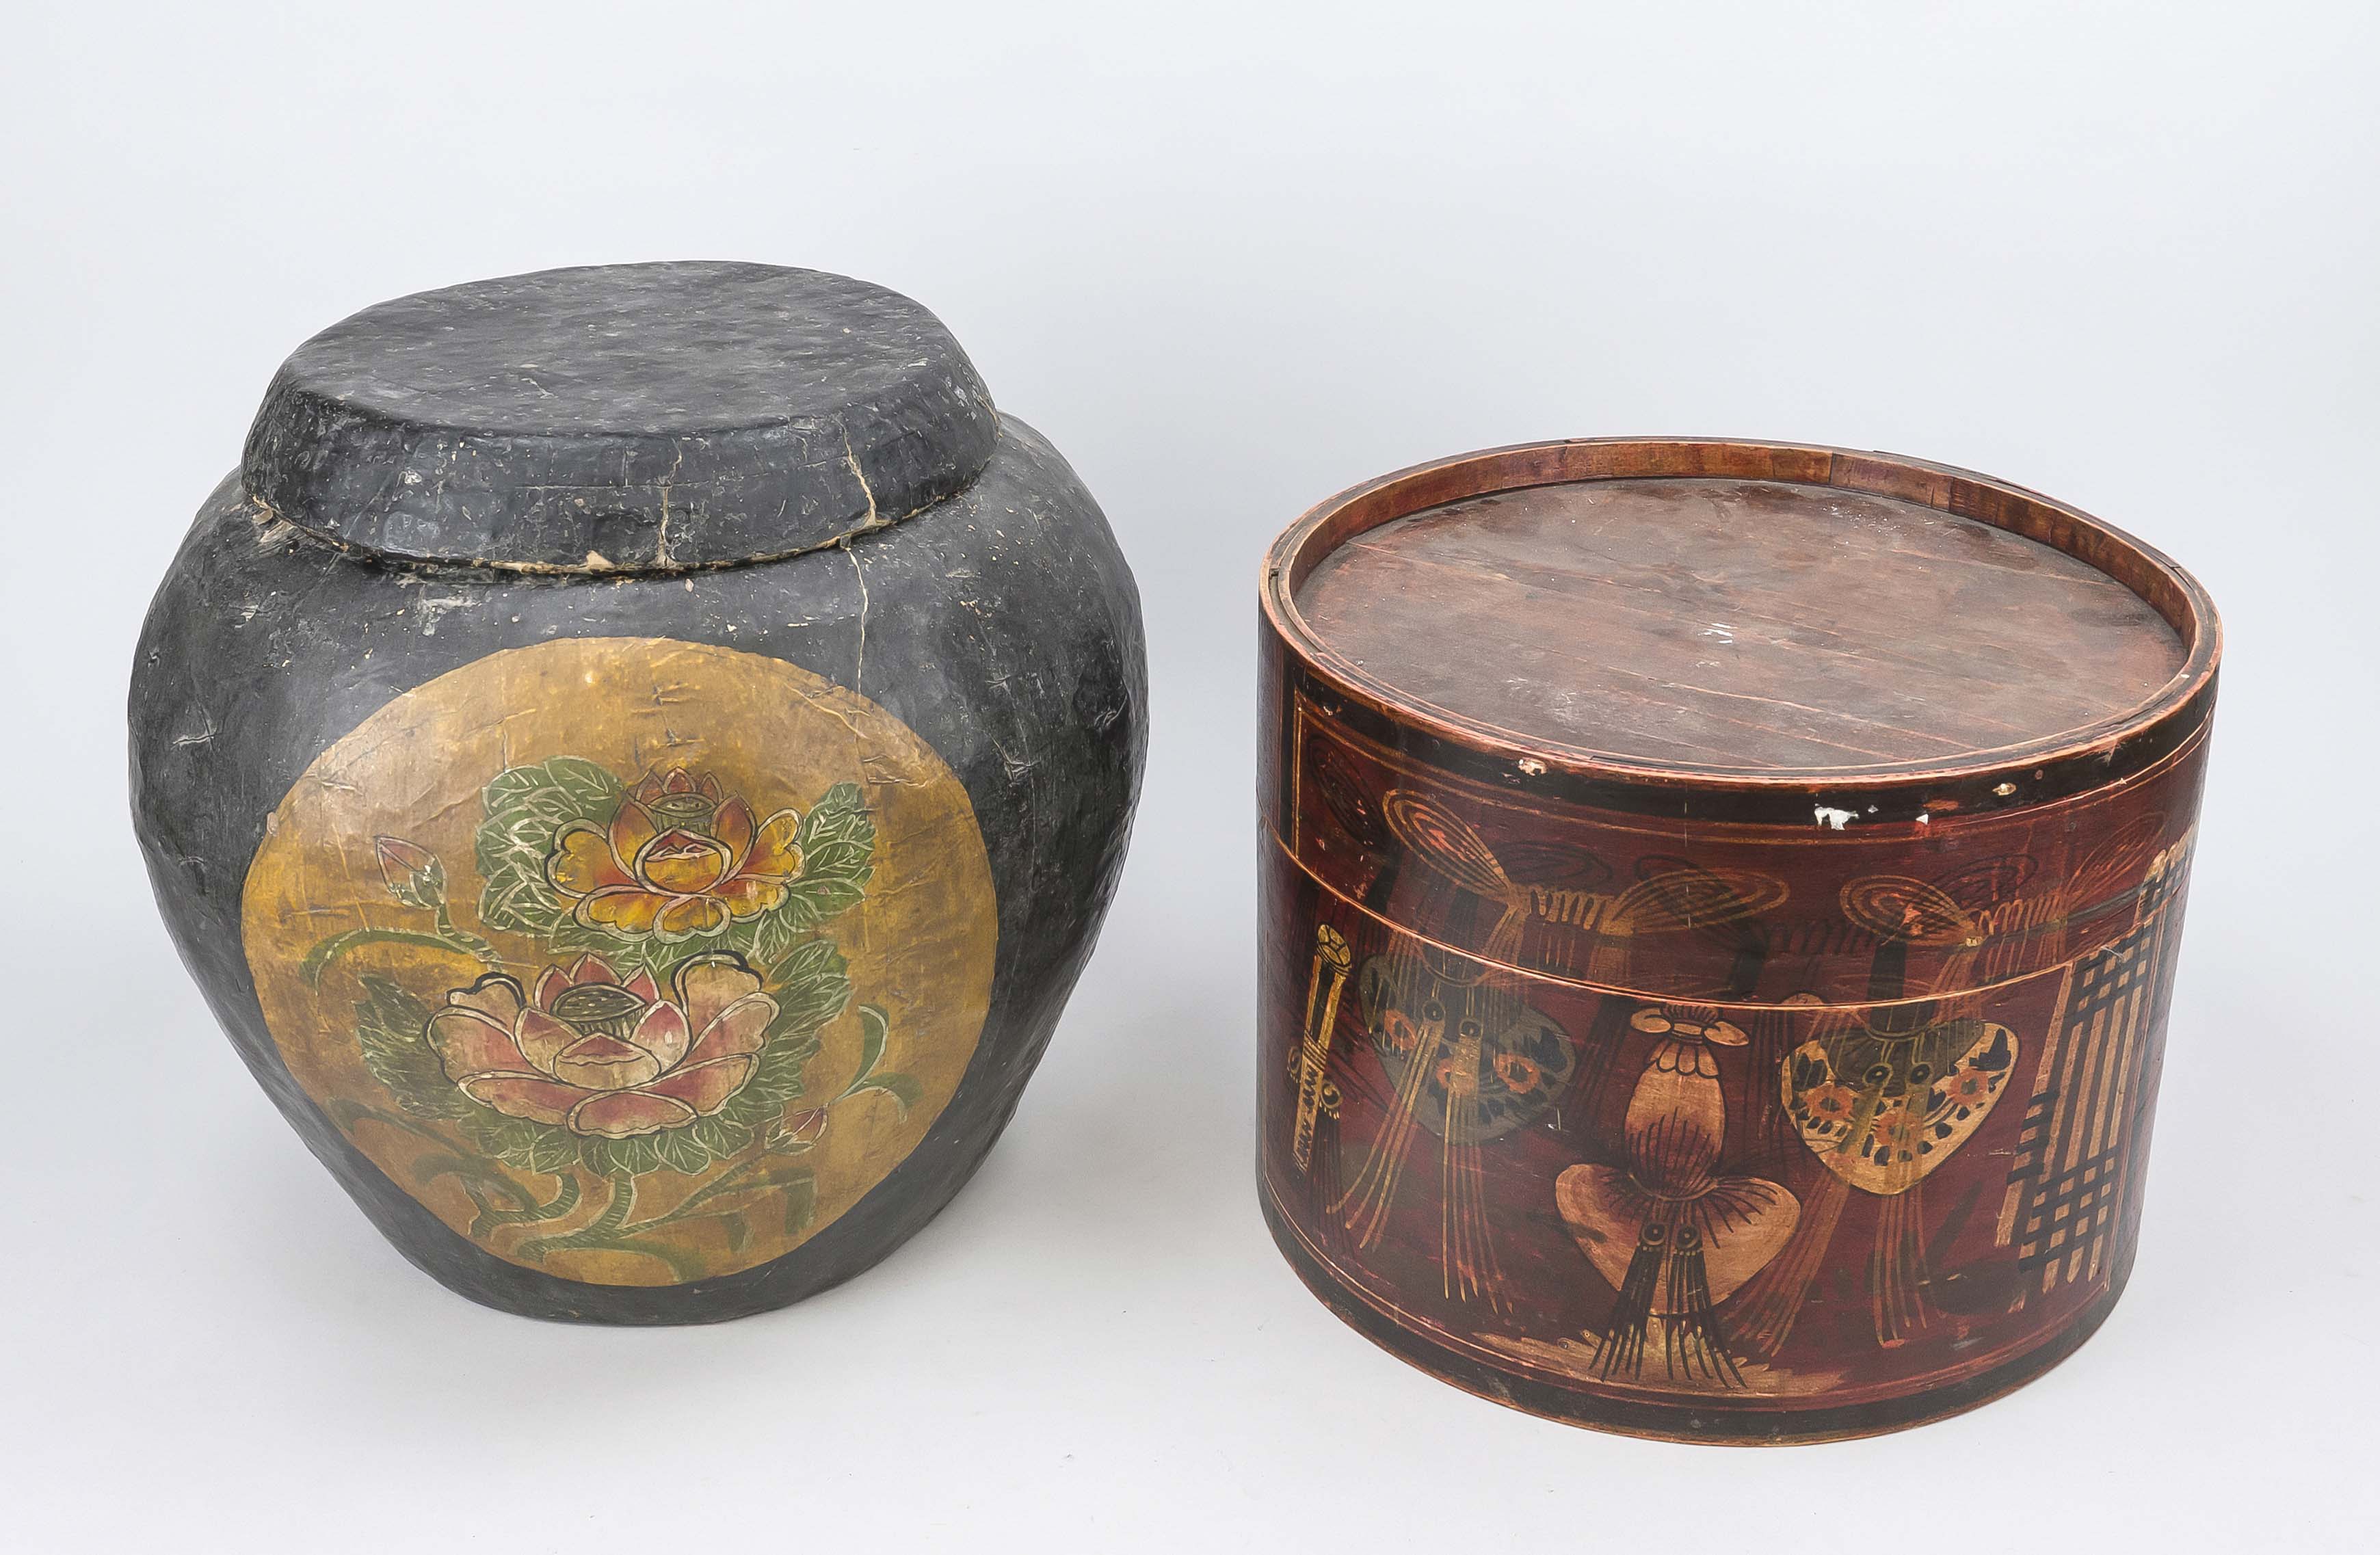 Spahn box and lidded pot, China, 19th/20th century, wood and?, polychrome painted, h. up to 35 cm